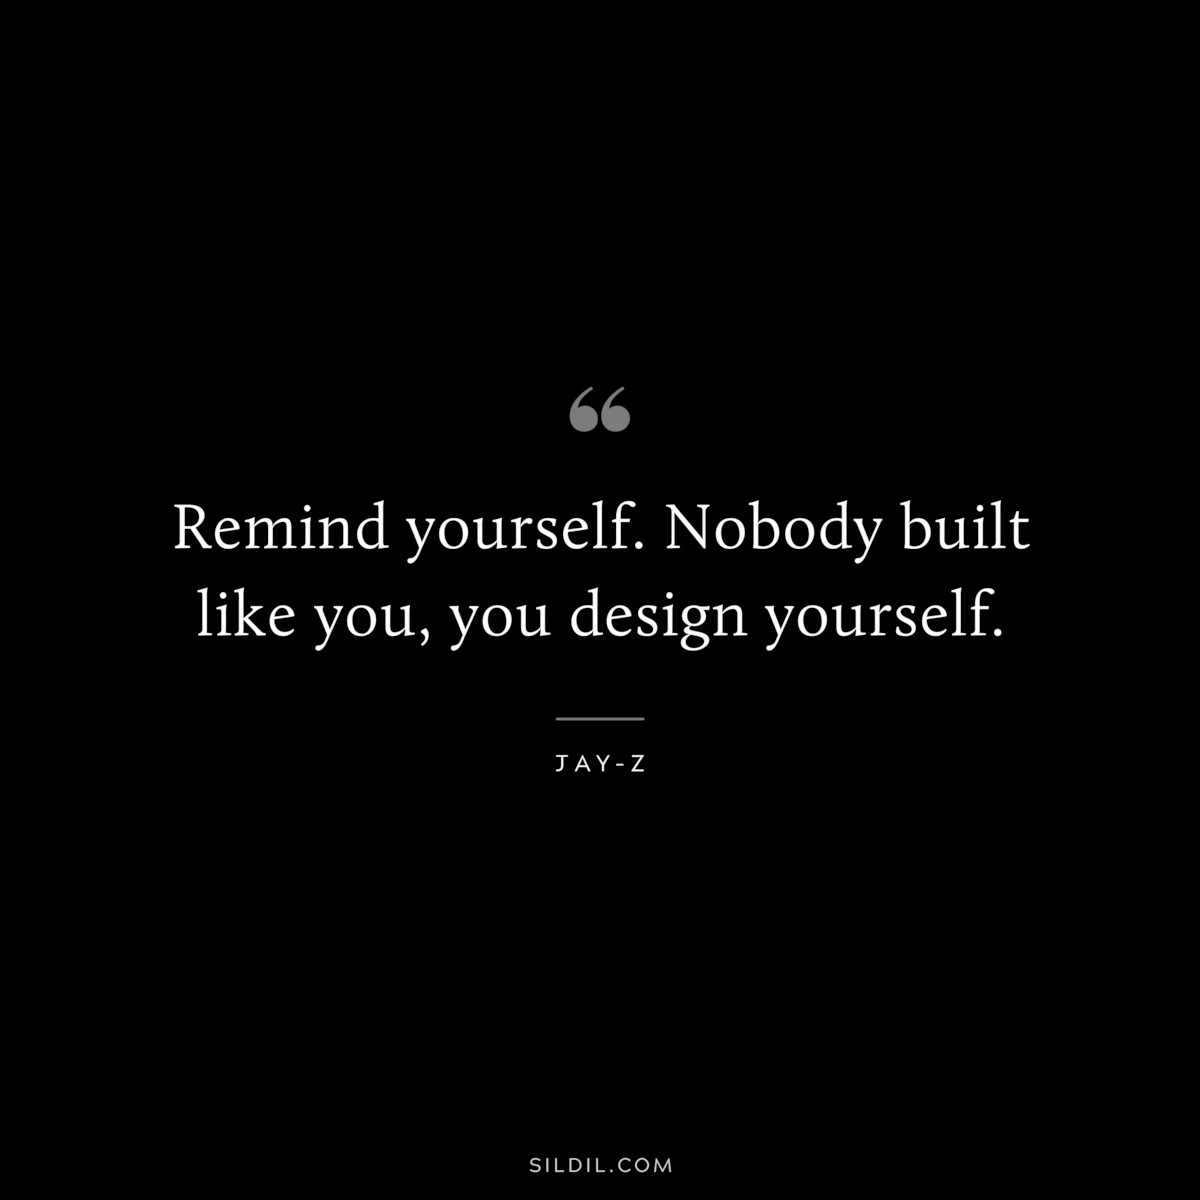 Remind yourself. Nobody built like you, you design yourself. ― Jay-Z